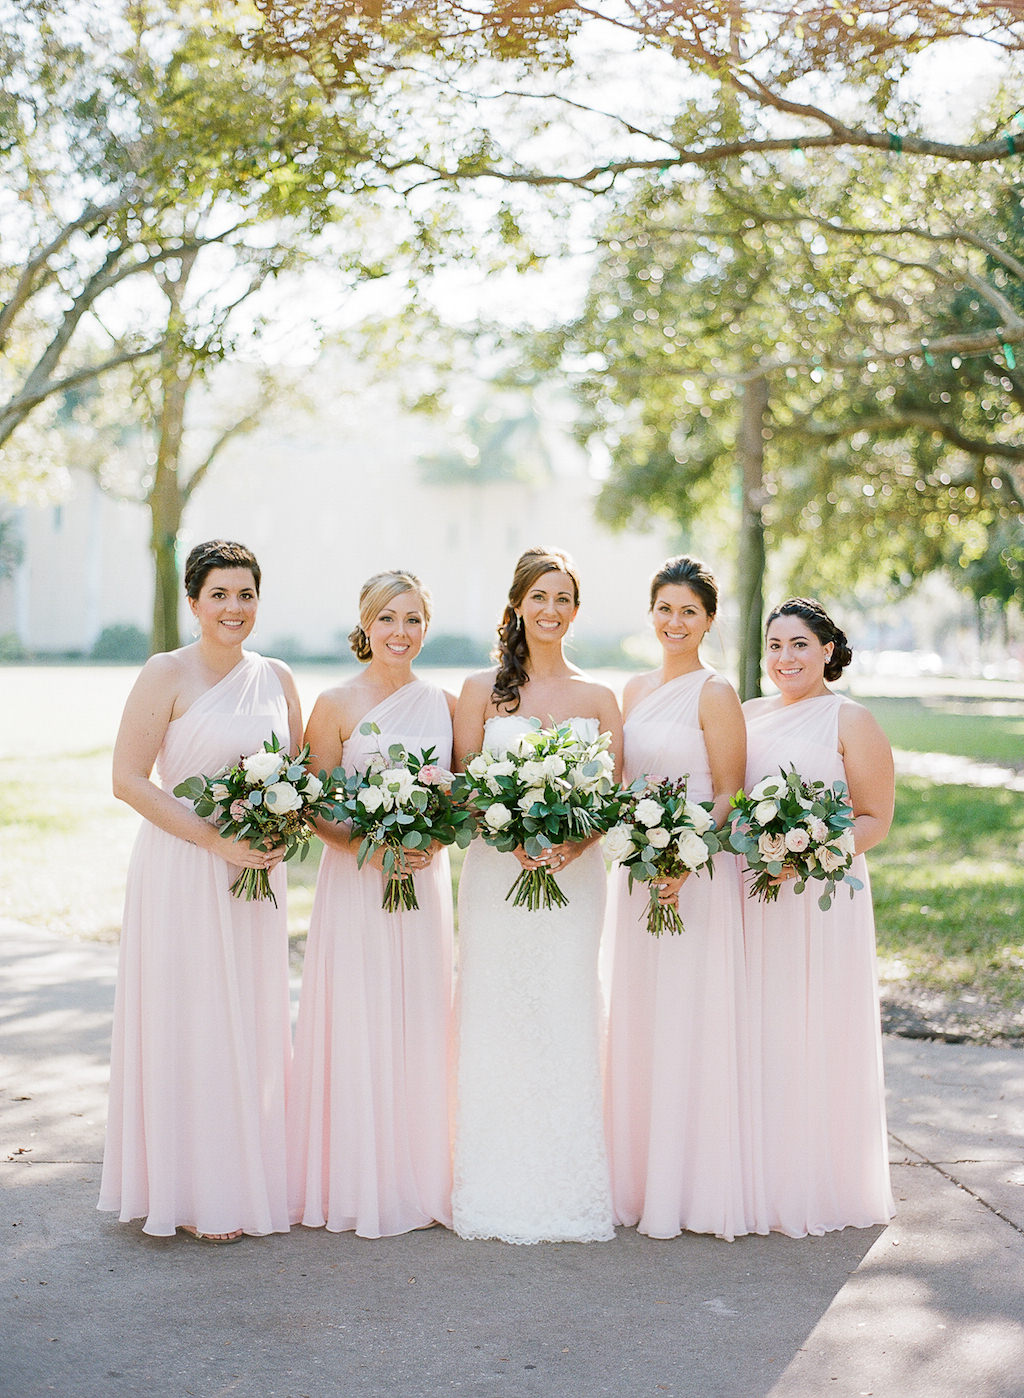 Outdoor Bridal Party Portrait with Asymetrical One Shoulder Floor Length Blush Pink Bridesmaids Dresses and White with Greenery Bouquets | Tampa Bay Wedding Hair and Makeup Artist Michele Renee the Studio